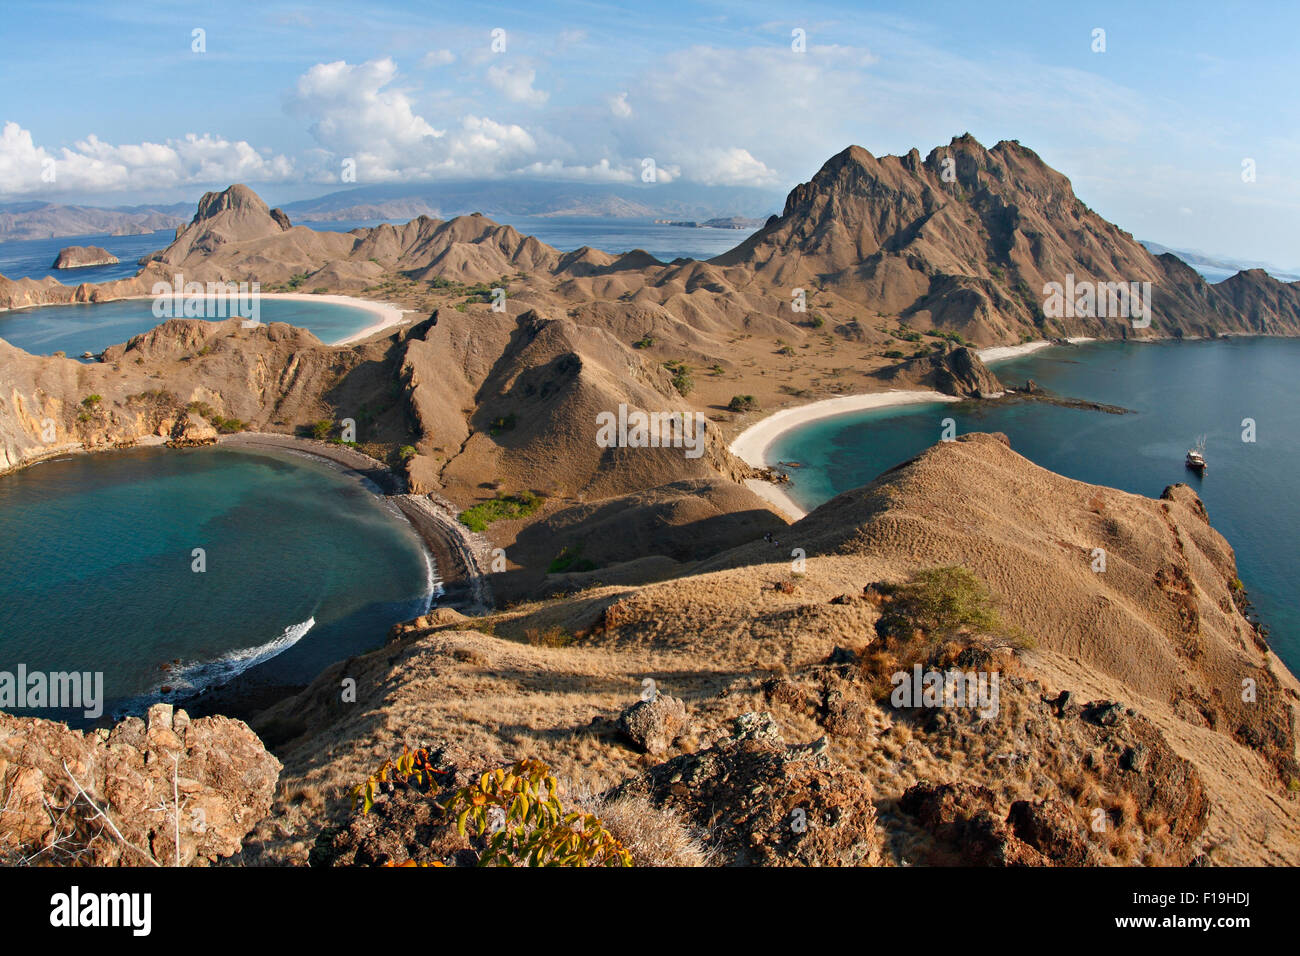 px91466-D. amazing view from atop Padar Island, Komodo National Park. Dive boat 'Seven Seas' in bay. Indonesia, Pacific Ocean. P Stock Photo